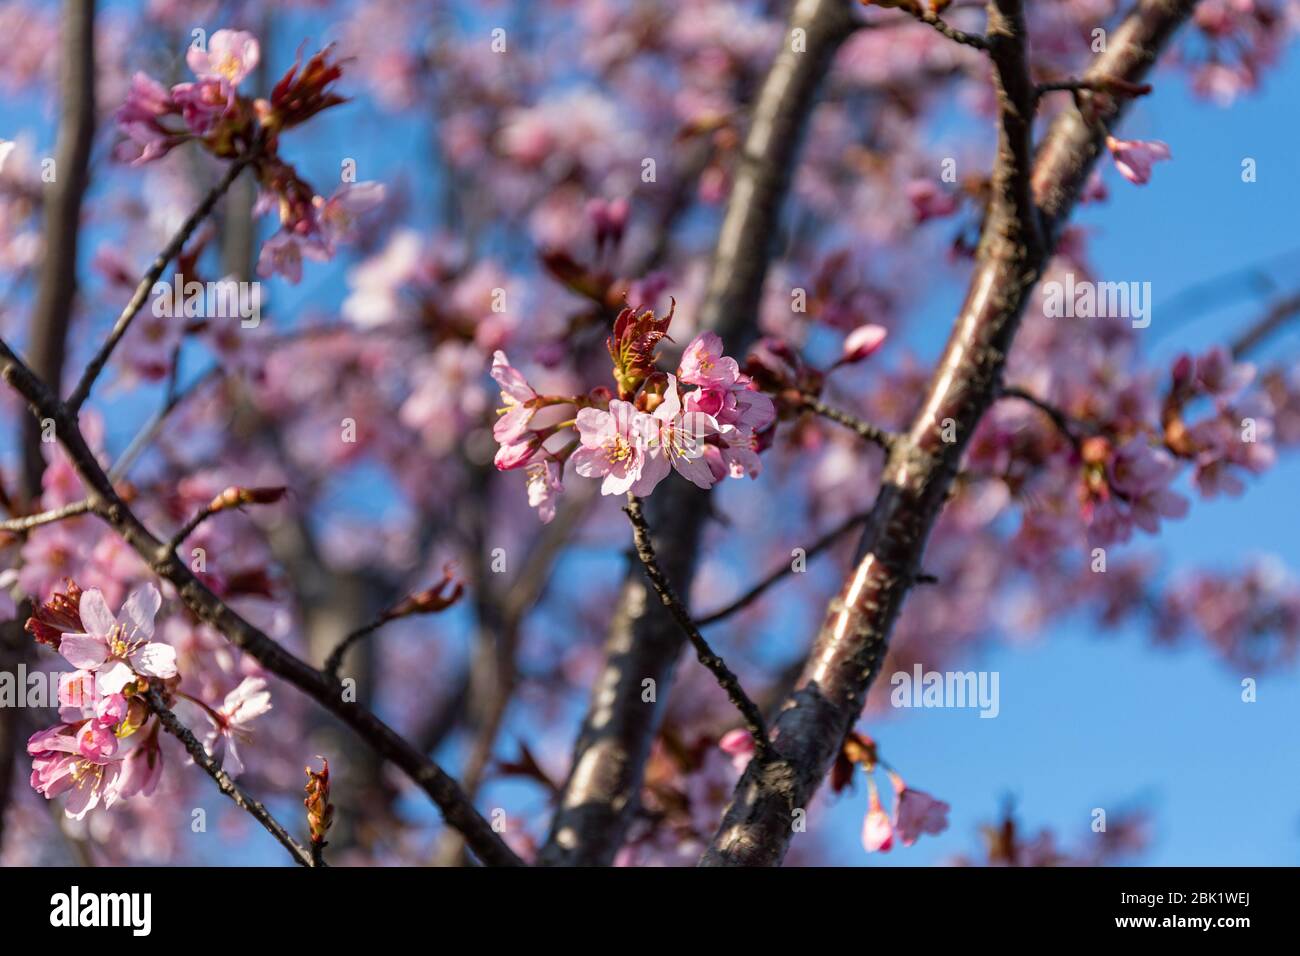 Close-up of pink cherry blossoms against blue sky. Selective focus. Stock Photo